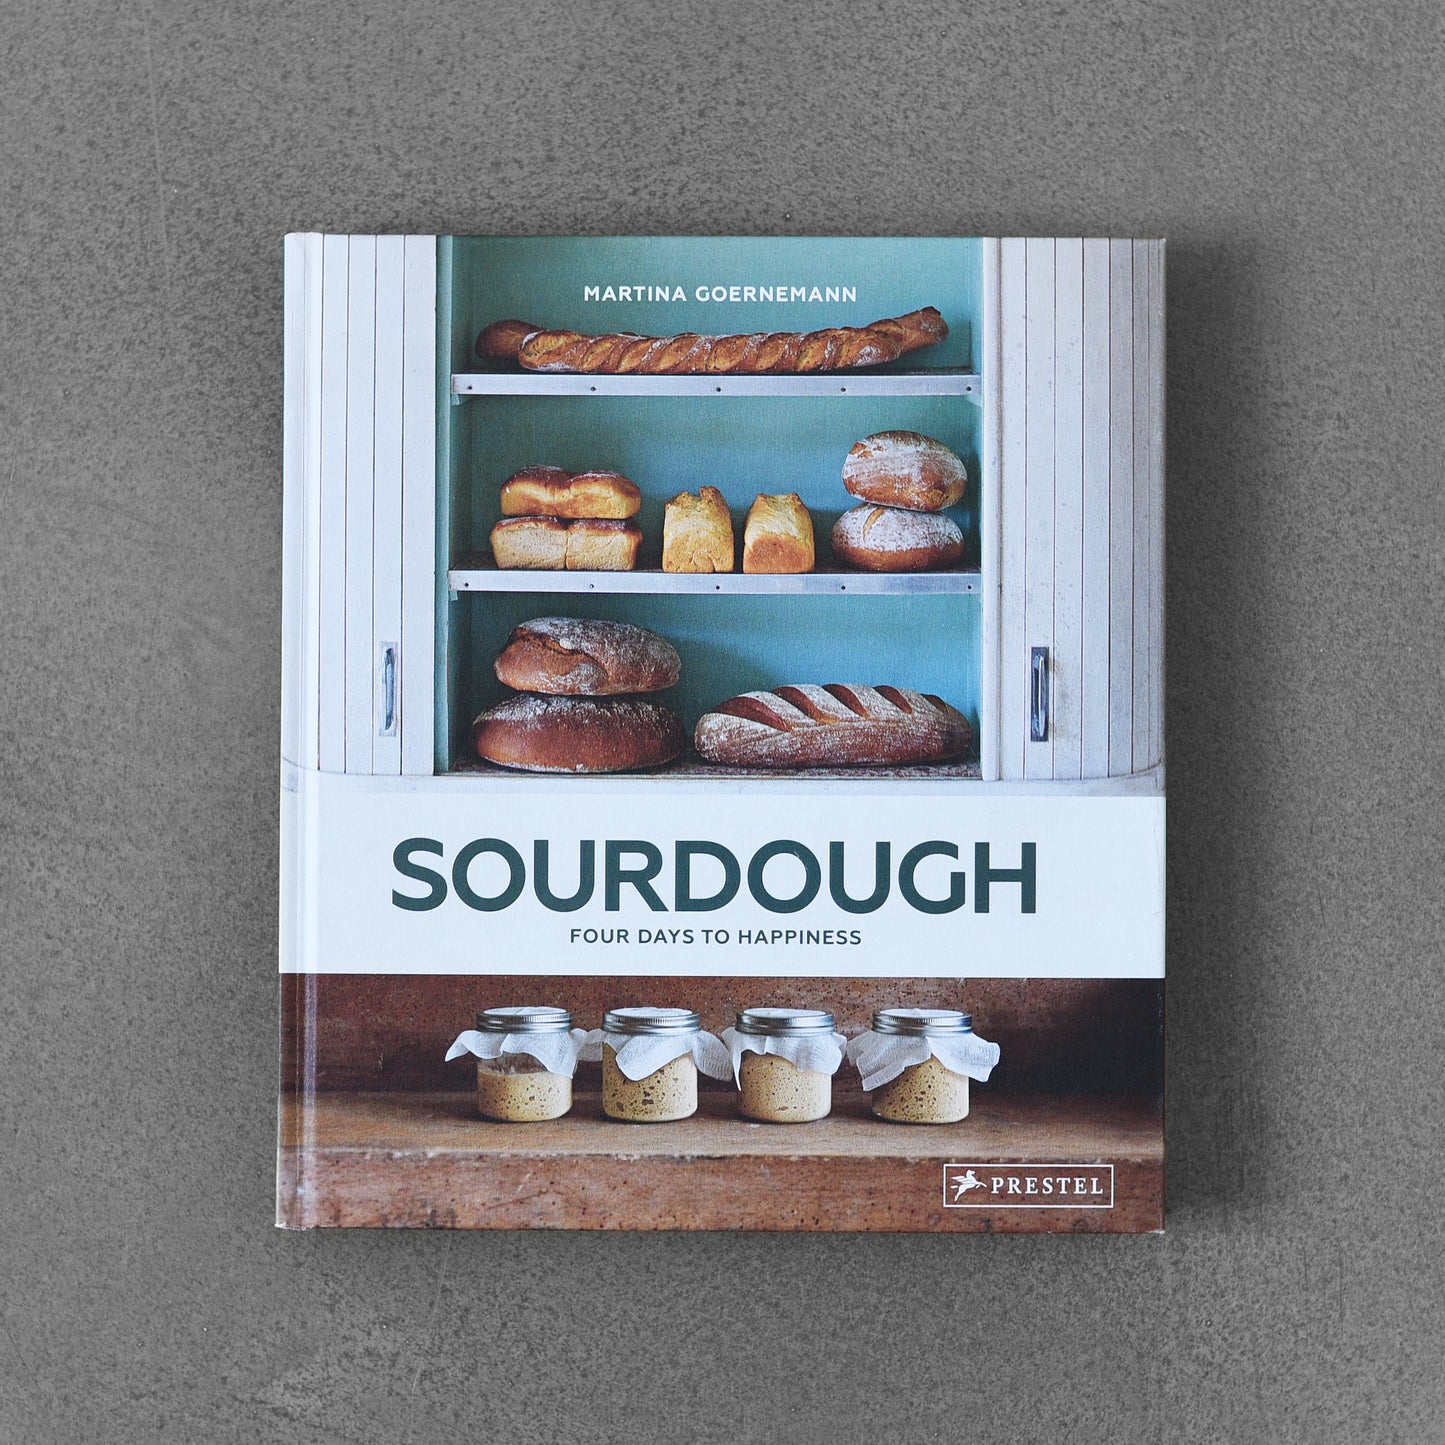 Sourdough: Four Days to Happiness